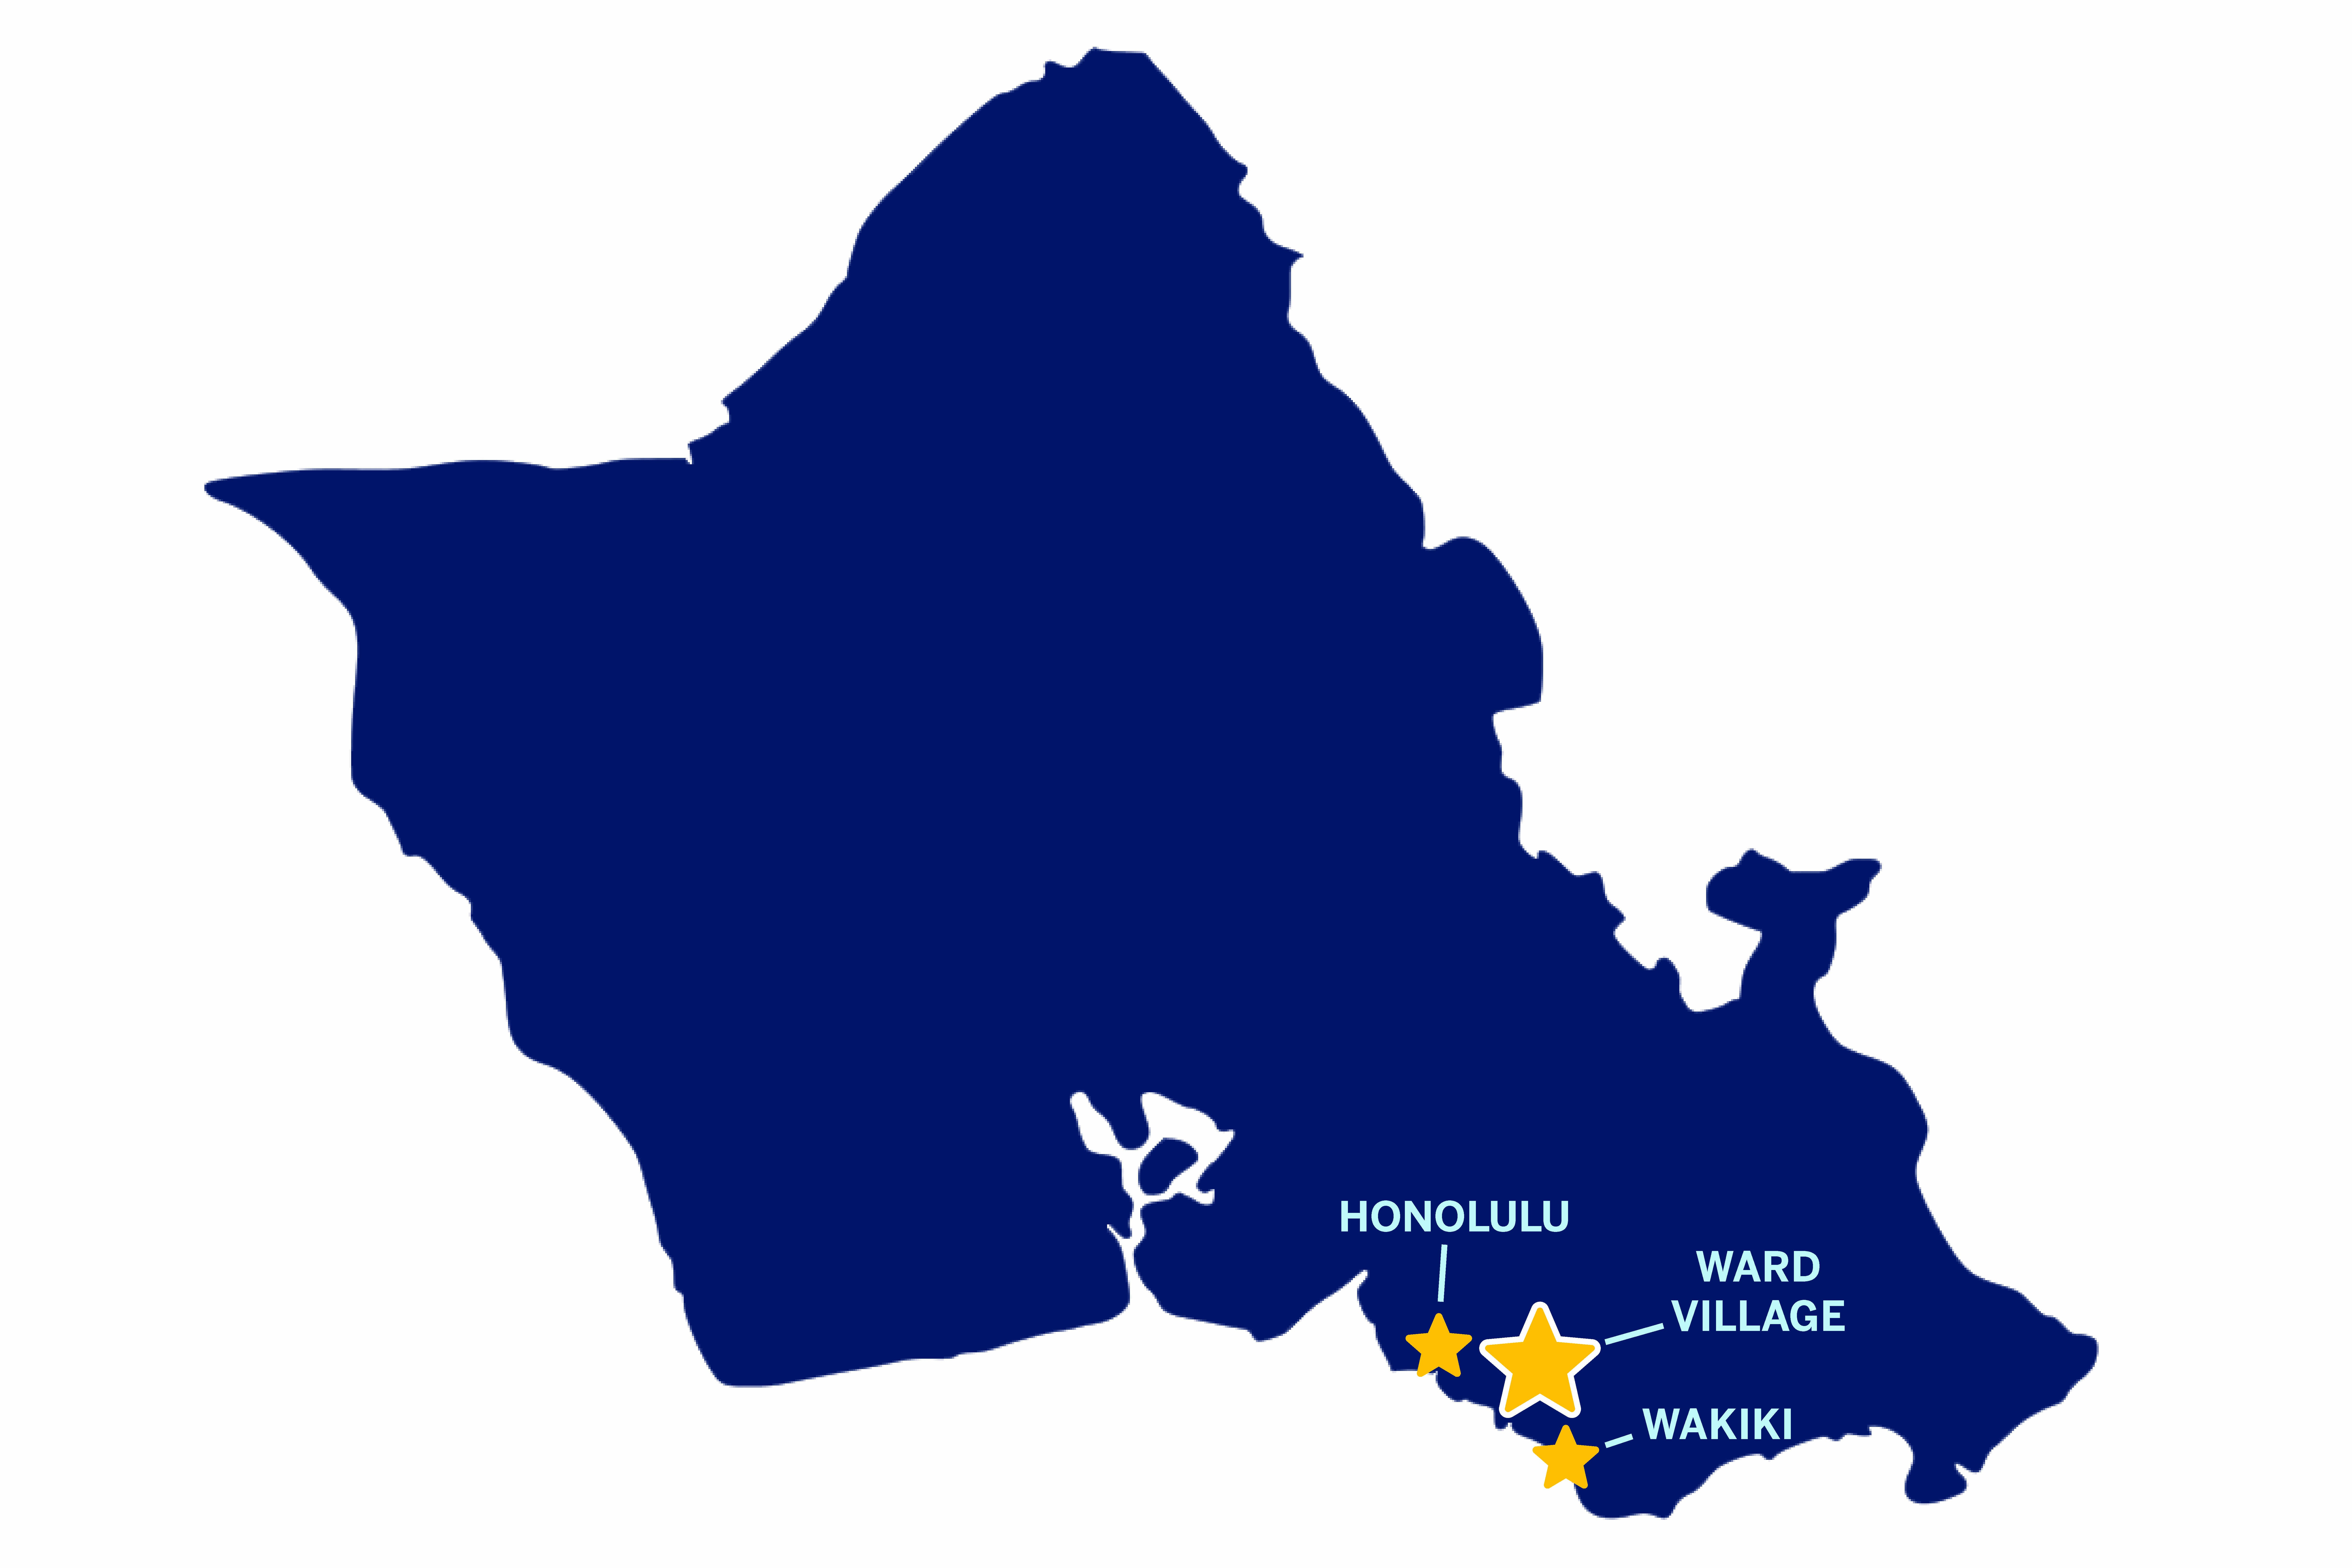 Map Of Oahu With Ward Village Honolulu And Waikiki Highlighted